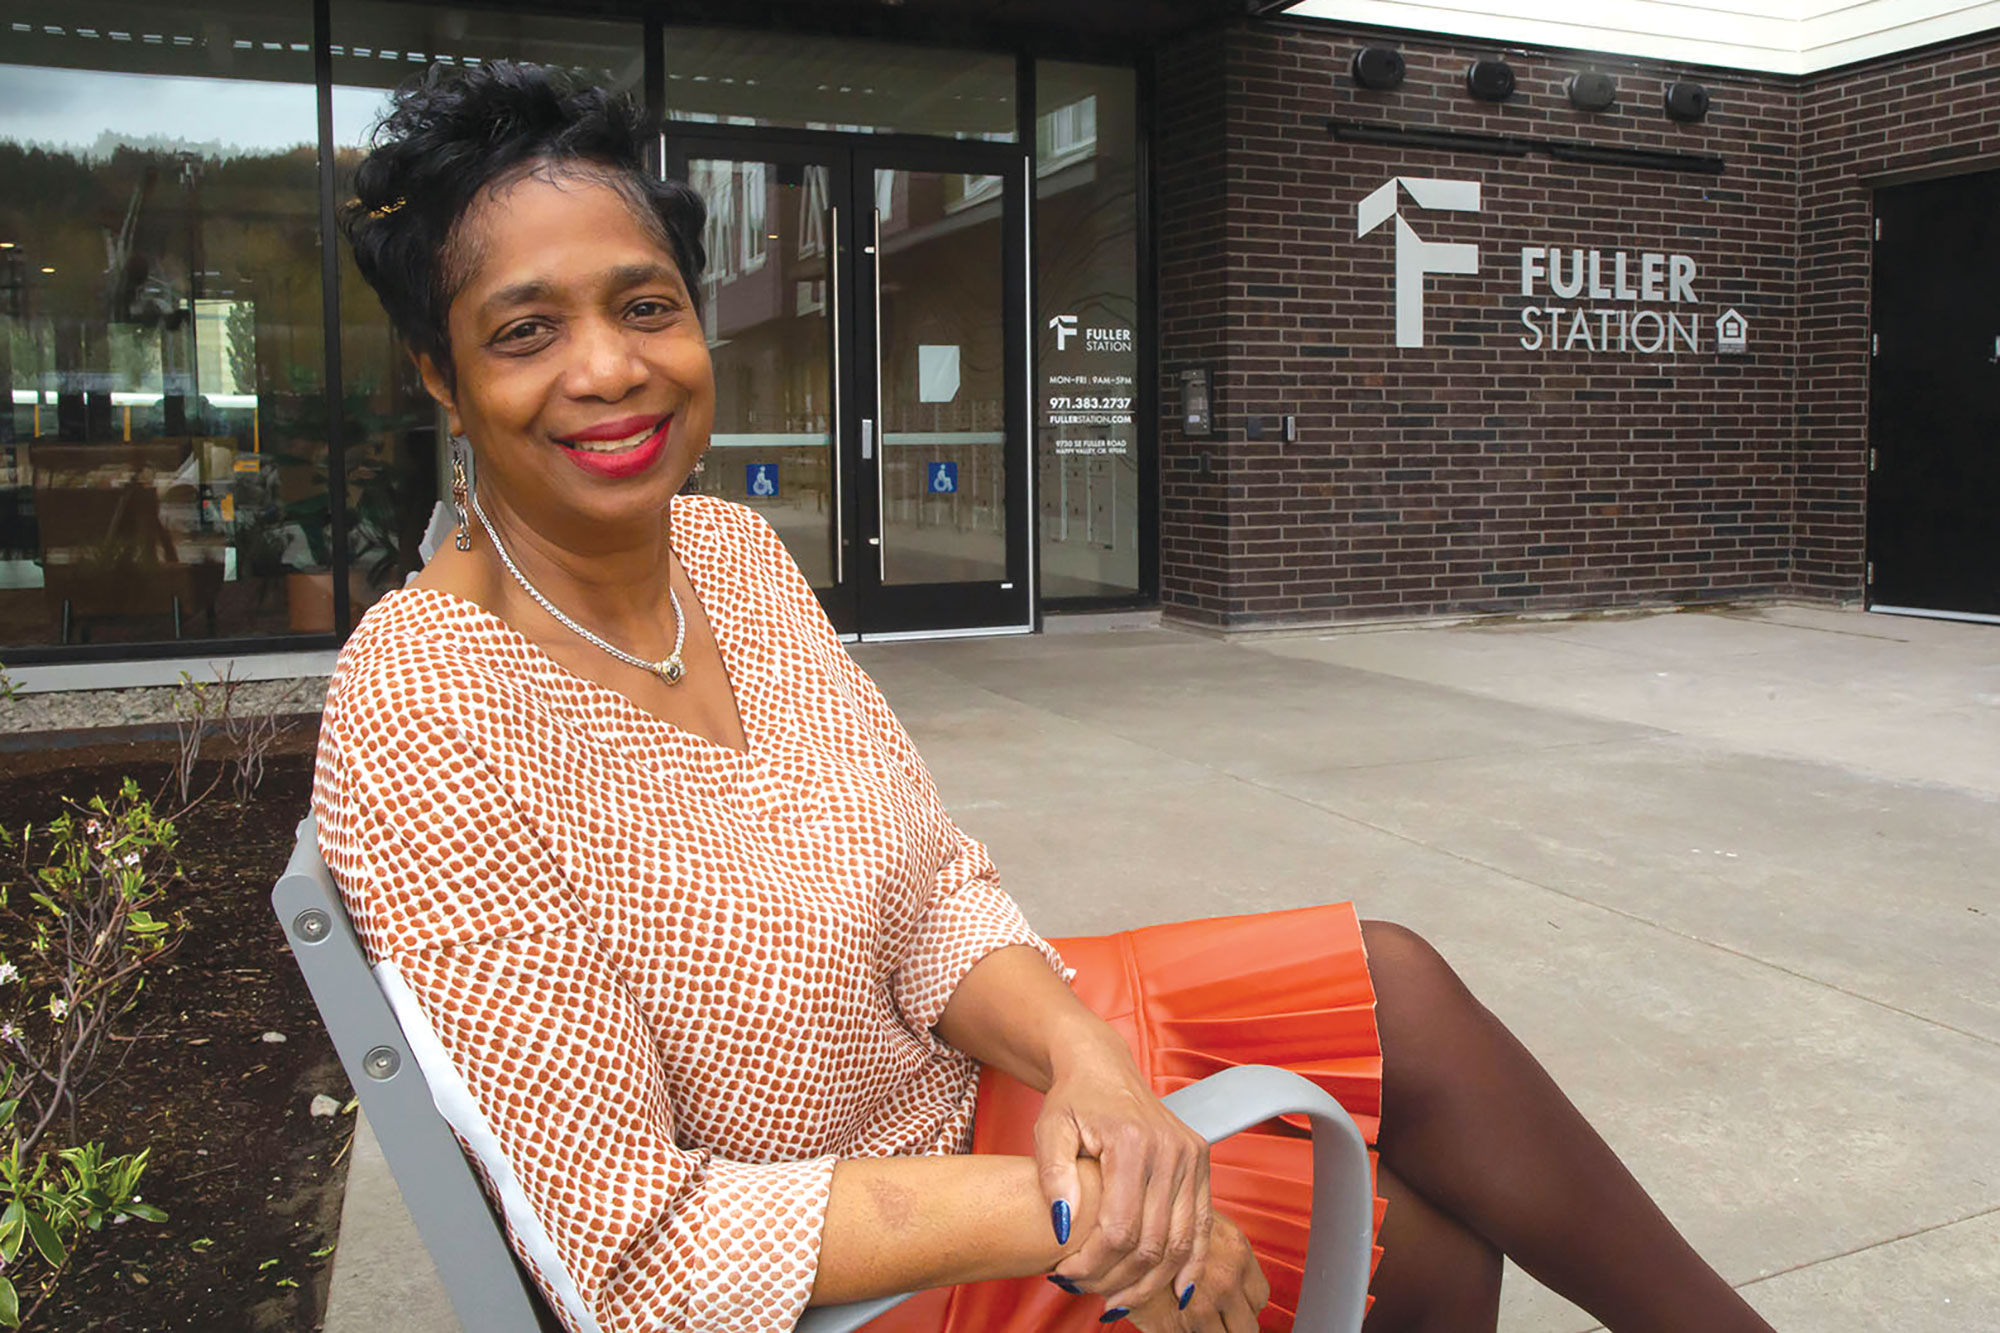 Helen Johnson sitting on a bench in front of Fuller Station